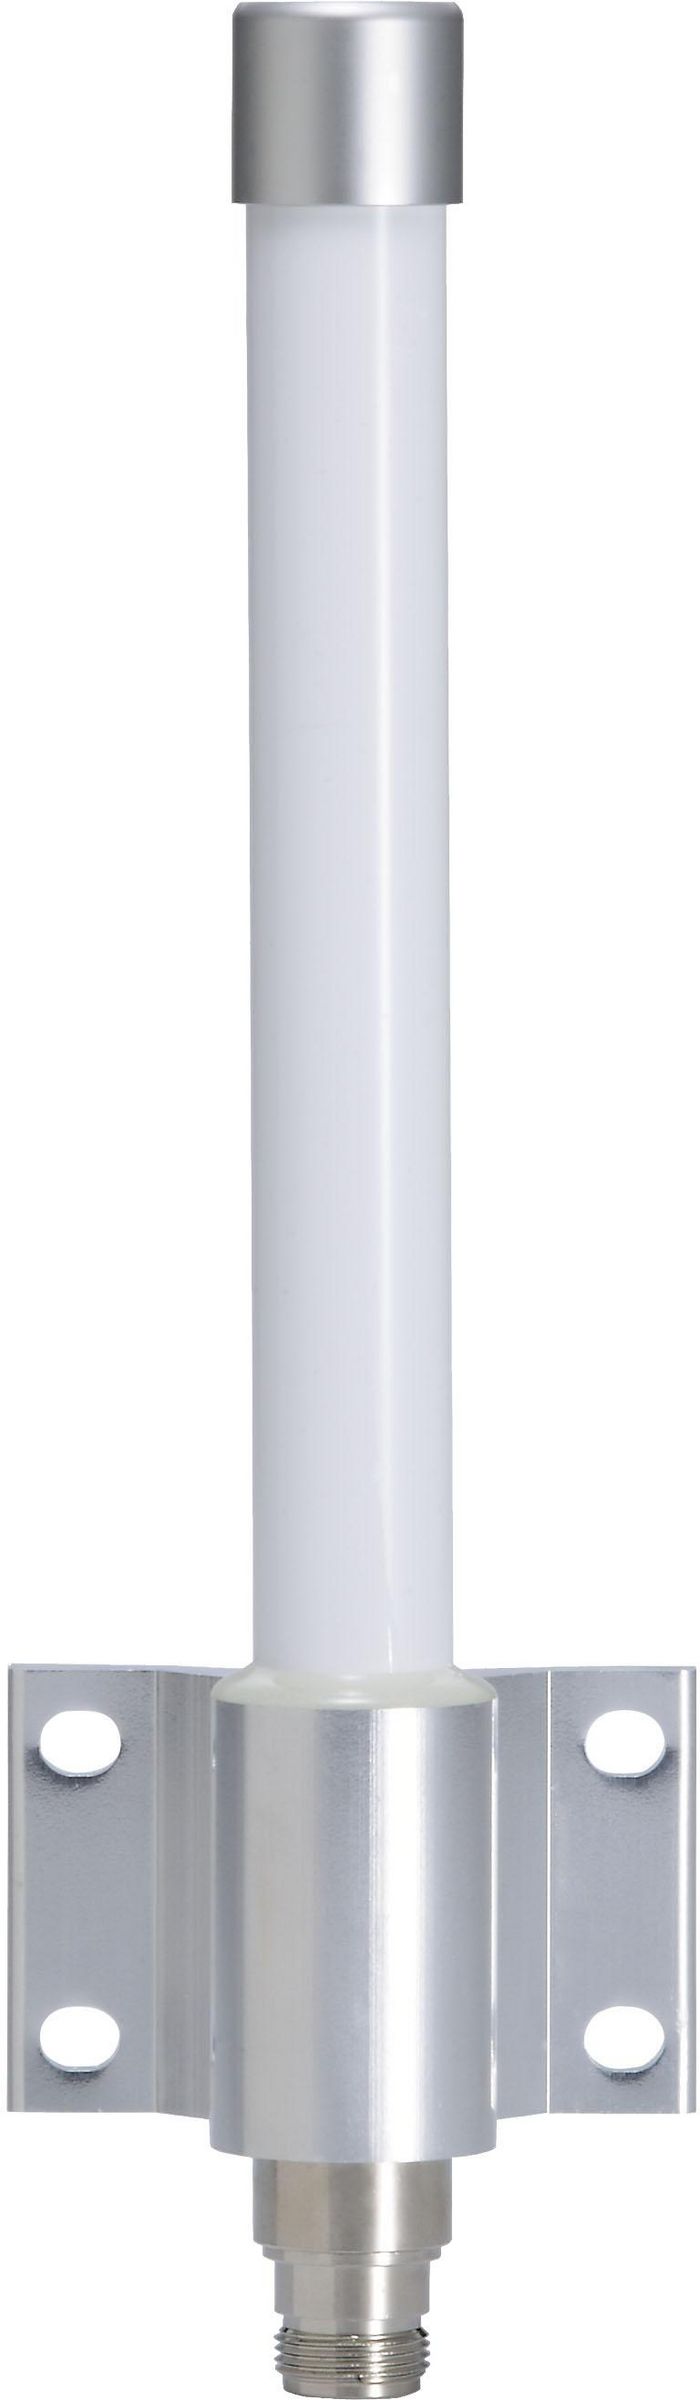 Moxa 4 dBi at 2.4 GHz or 7 dBi at 5 GHz, dual-band, omnidirectional antennas - W124319381